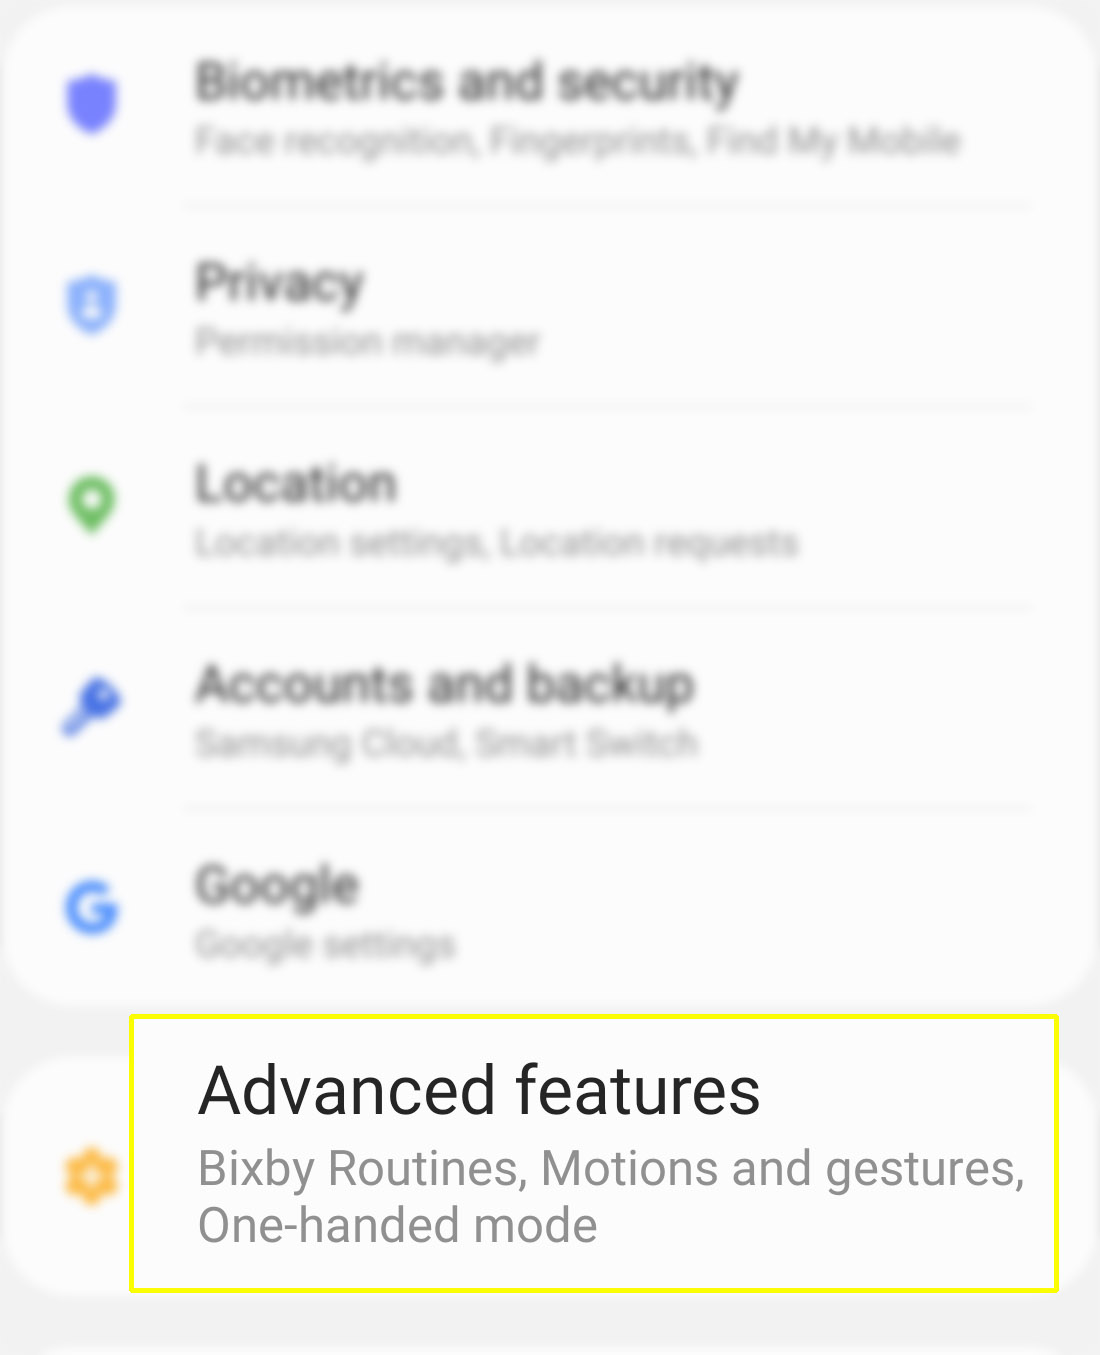 activate galaxy s20 one-handed mode - advanced features